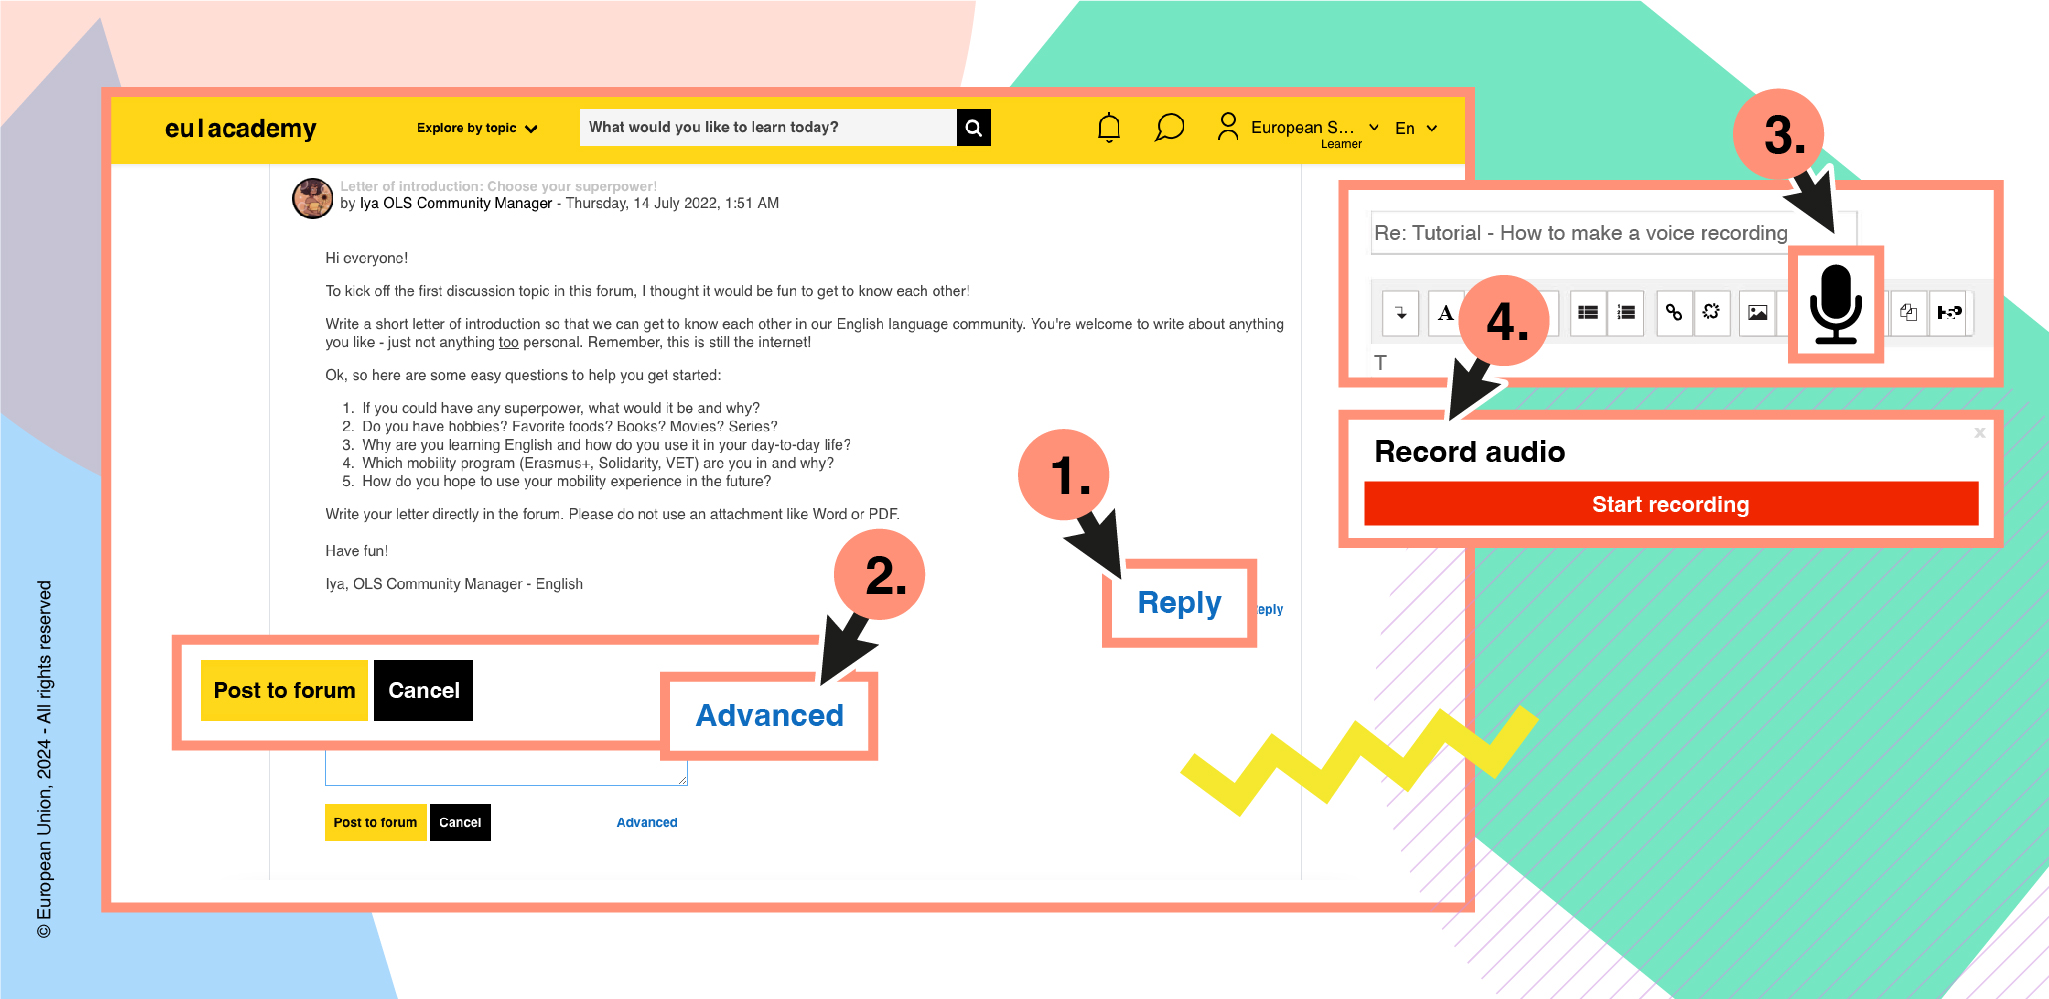 Screenshots of the Online Learning Support platform showing how to create a voice recording